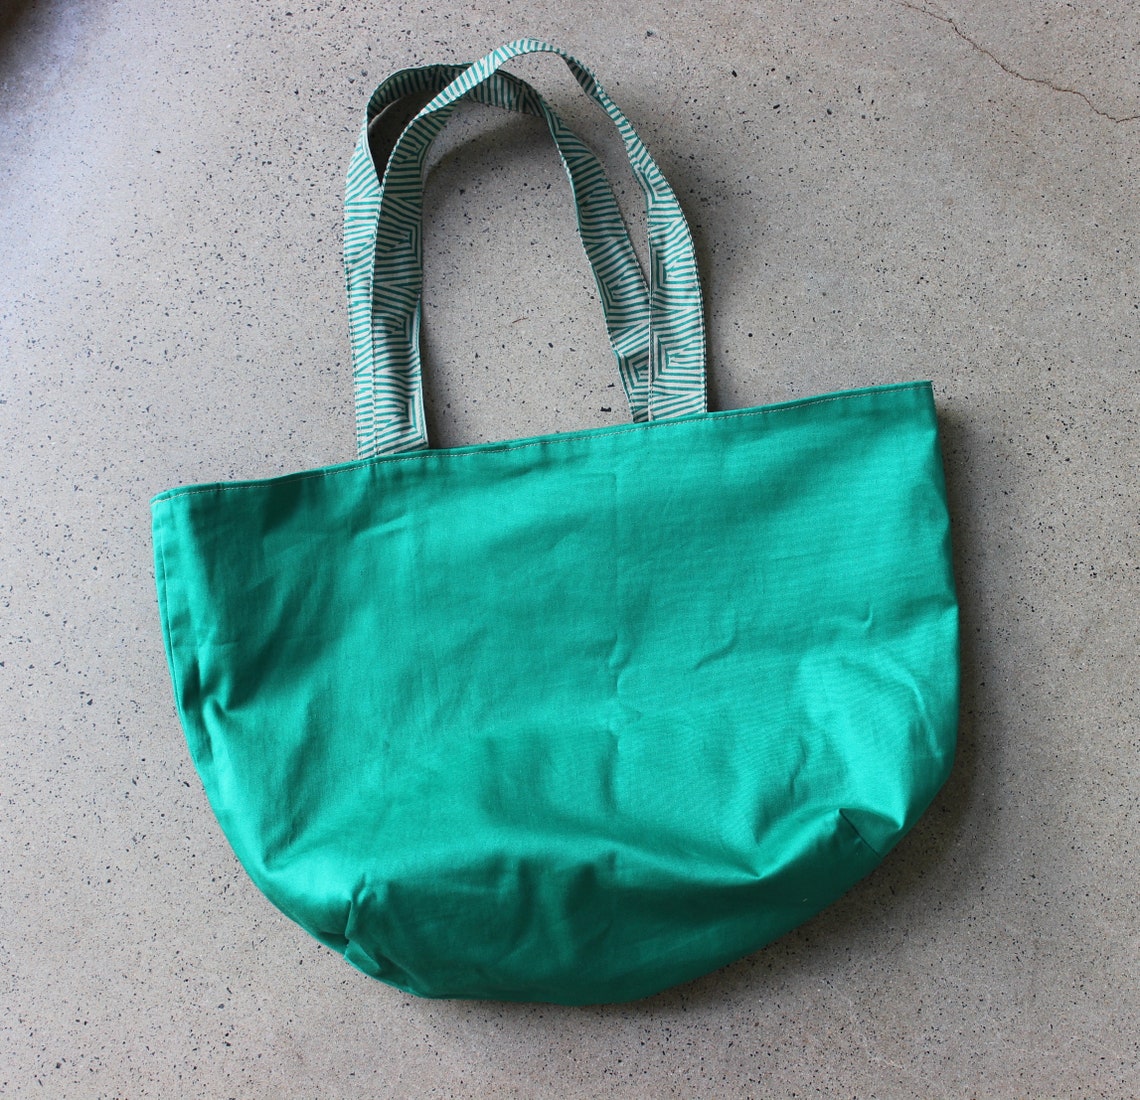 Tote Bag, Green and Grey, Fully Lined and Reversible, Medium Size - Etsy